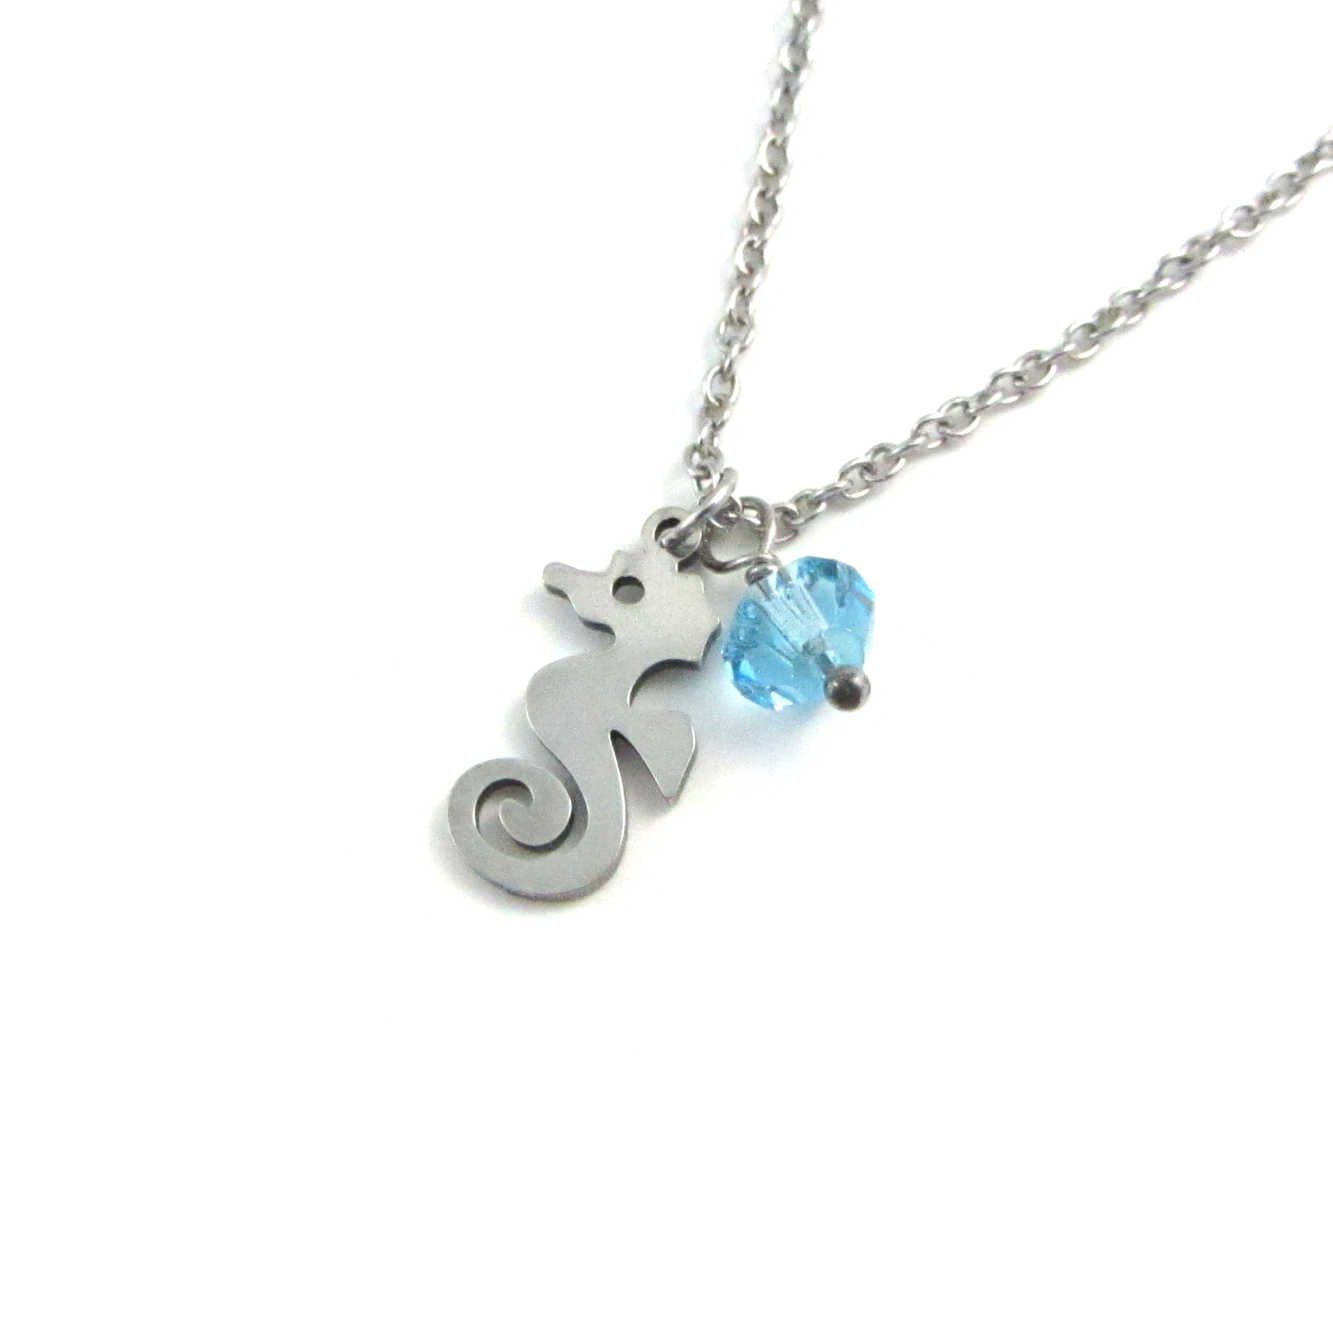 nautical seahorse charm and a light blue crystal charm on a stainless steel chain